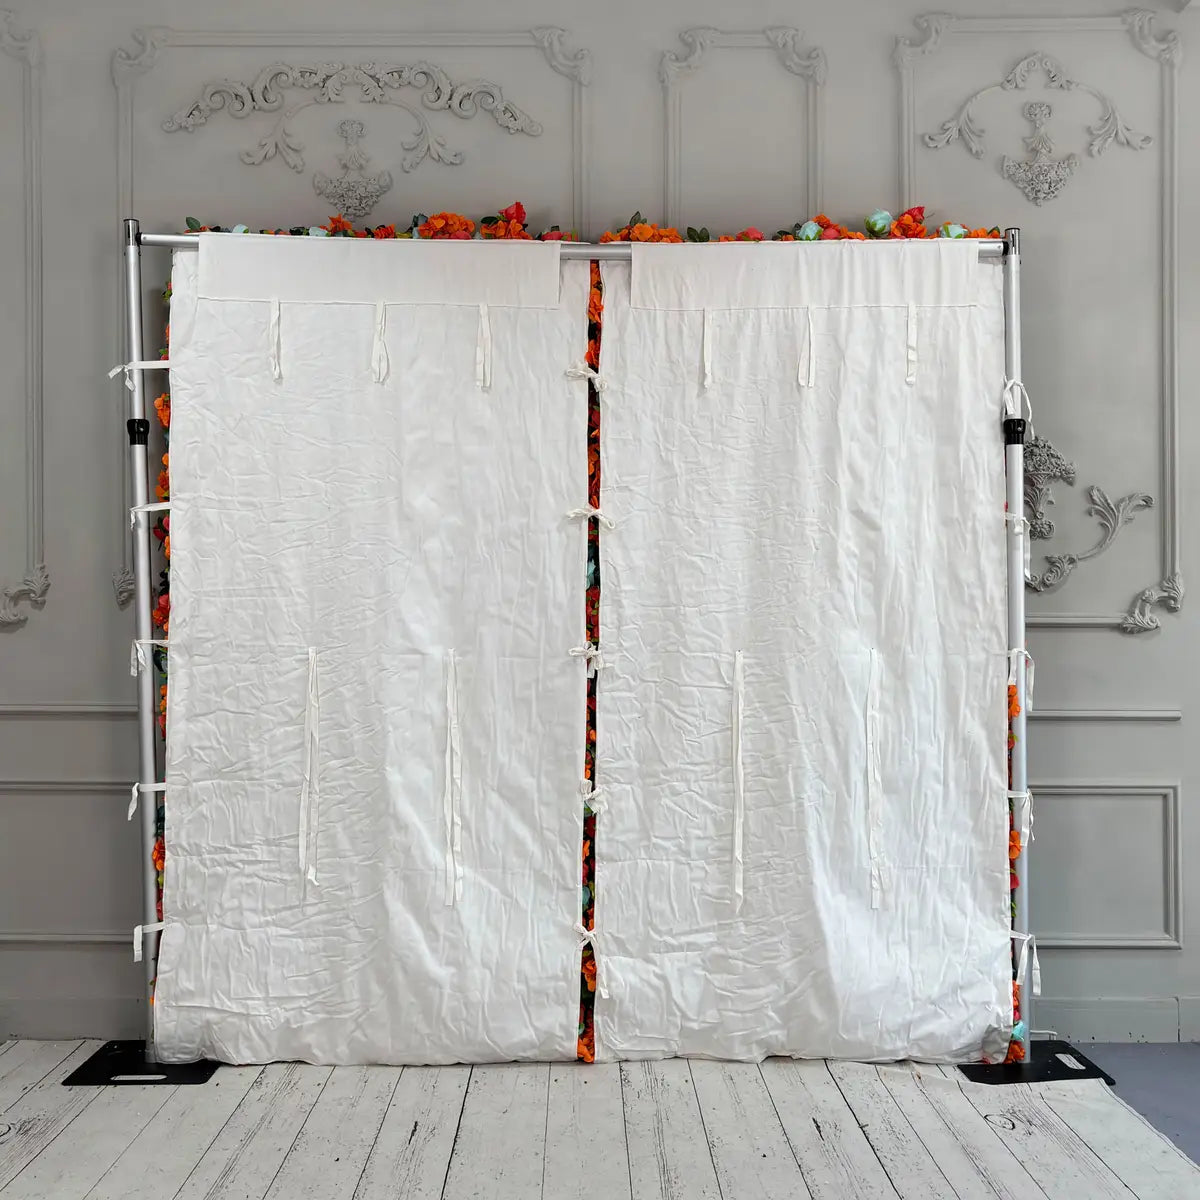 Flower Wall 3D Orange & Blue Rolling Up Curtain Floral Backdrop Wedding Party Proposal Decor